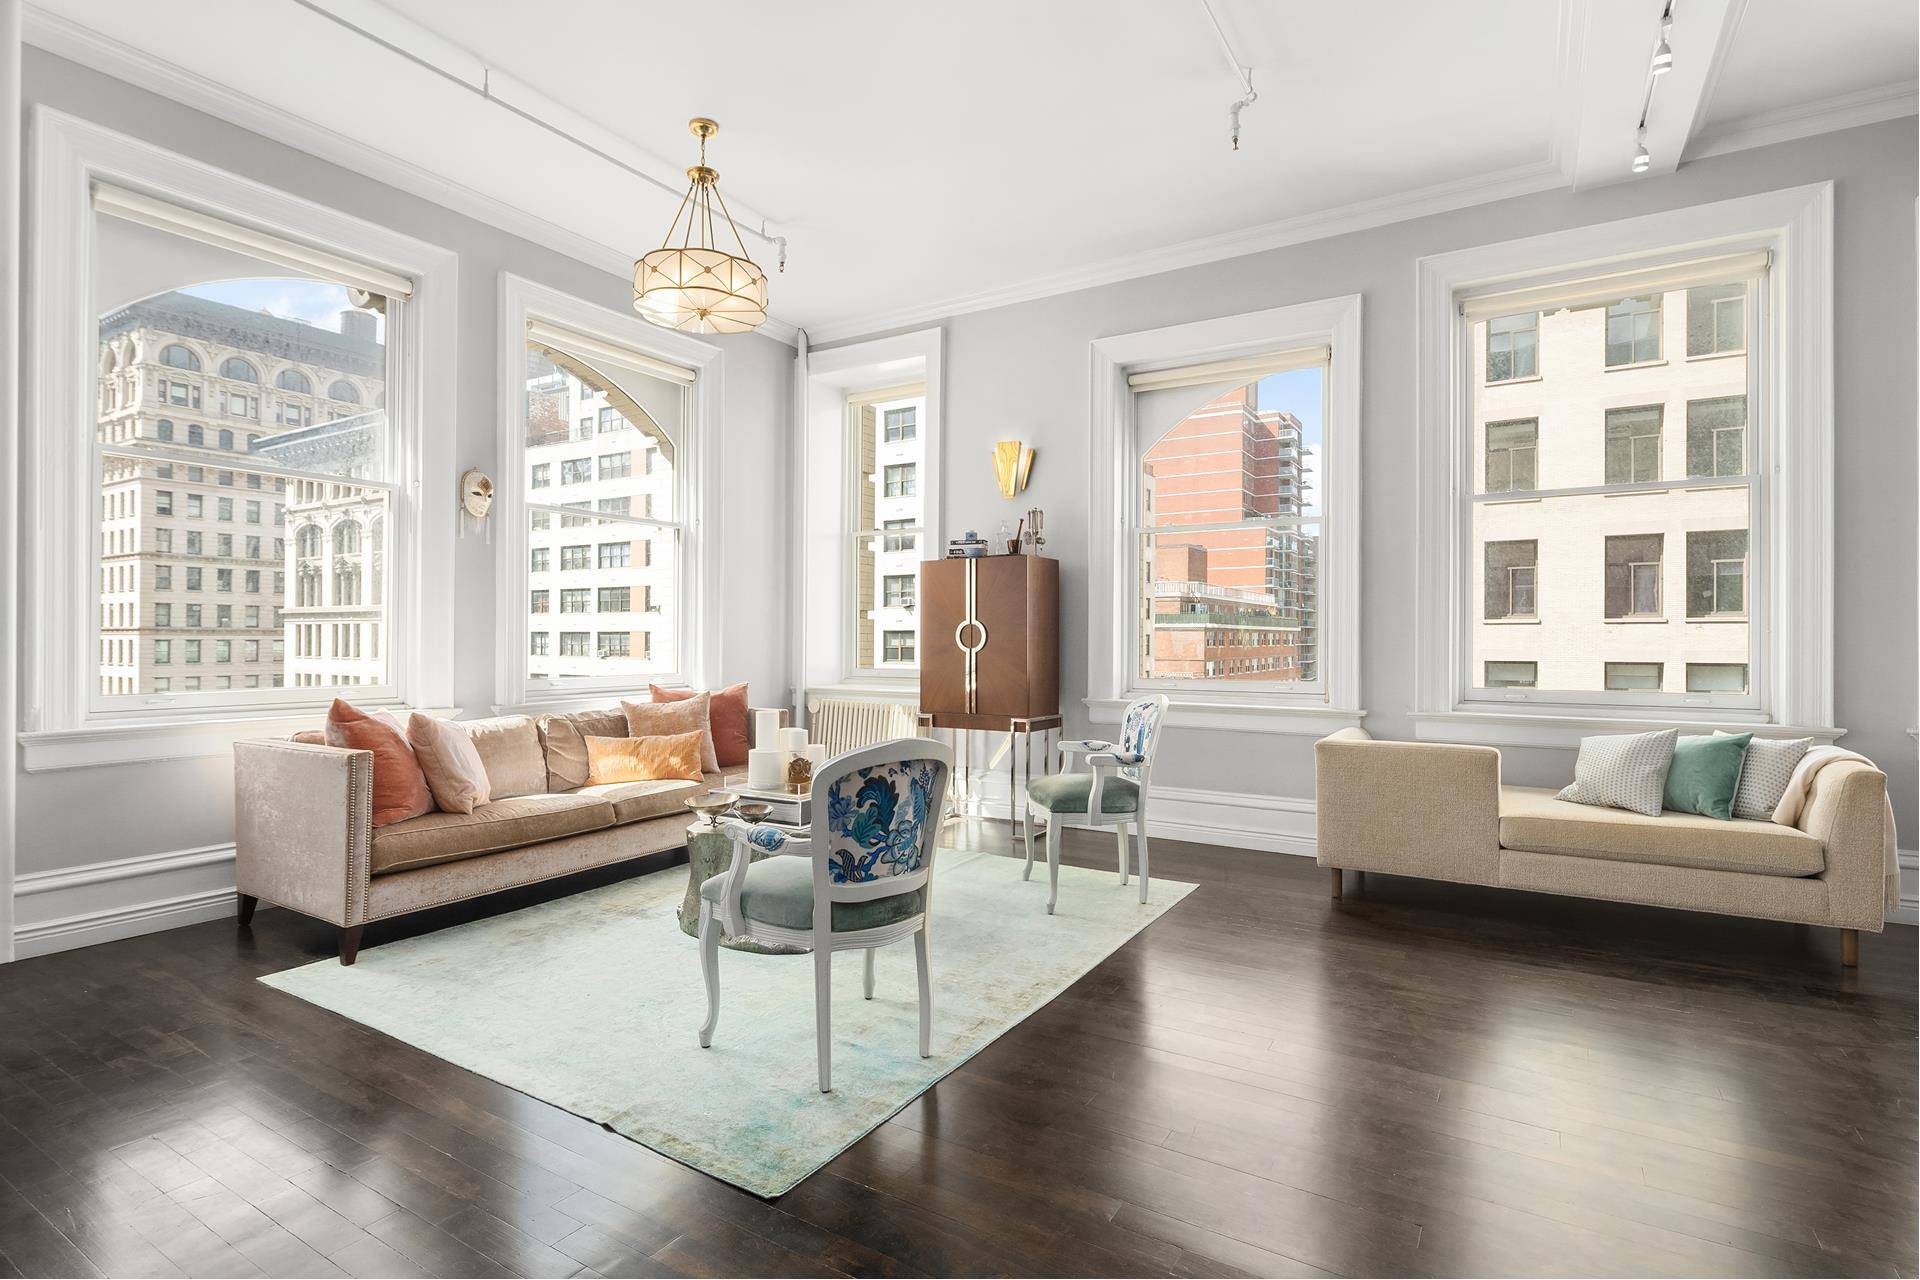 Renovated 2 Bedroom, 2 Bathroom Pre WW1 Loft apartment in the heart of Flatiron Union Square is a must see.